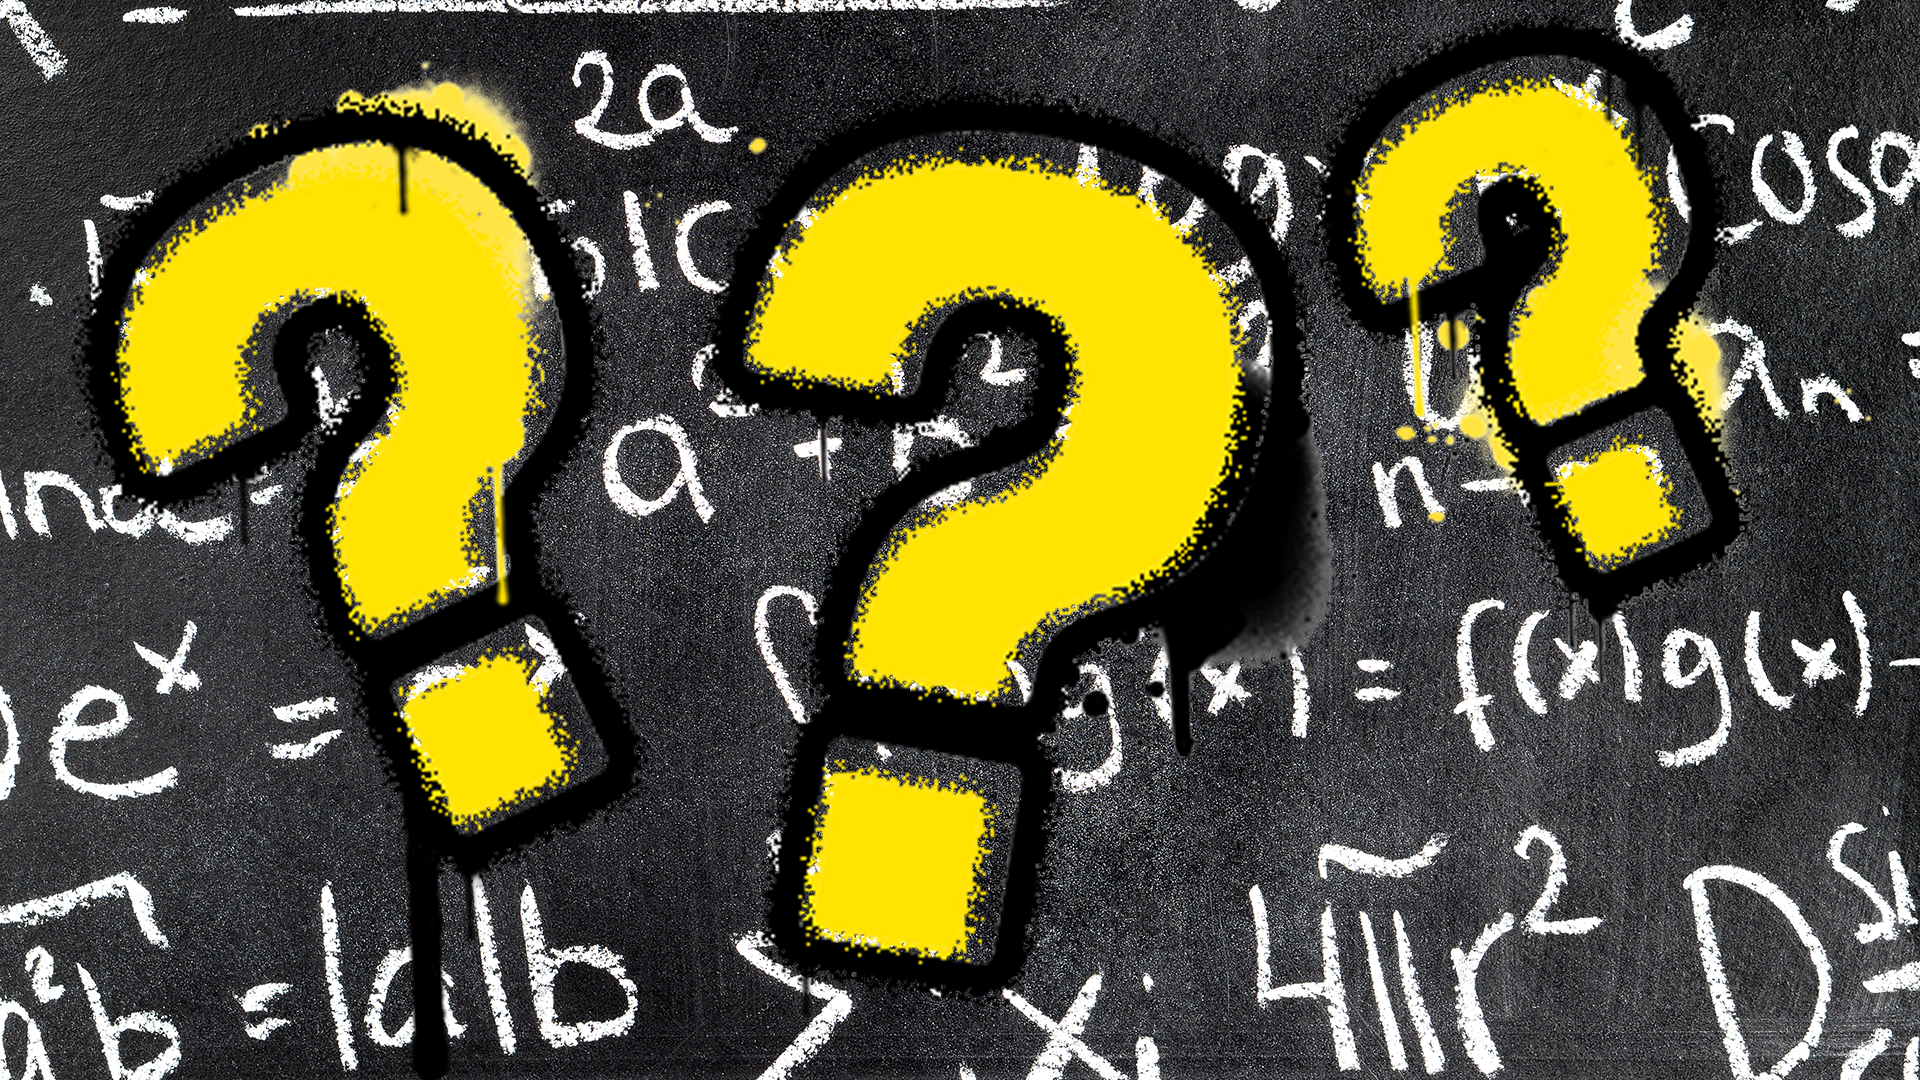 Blackboard with Beano question marks